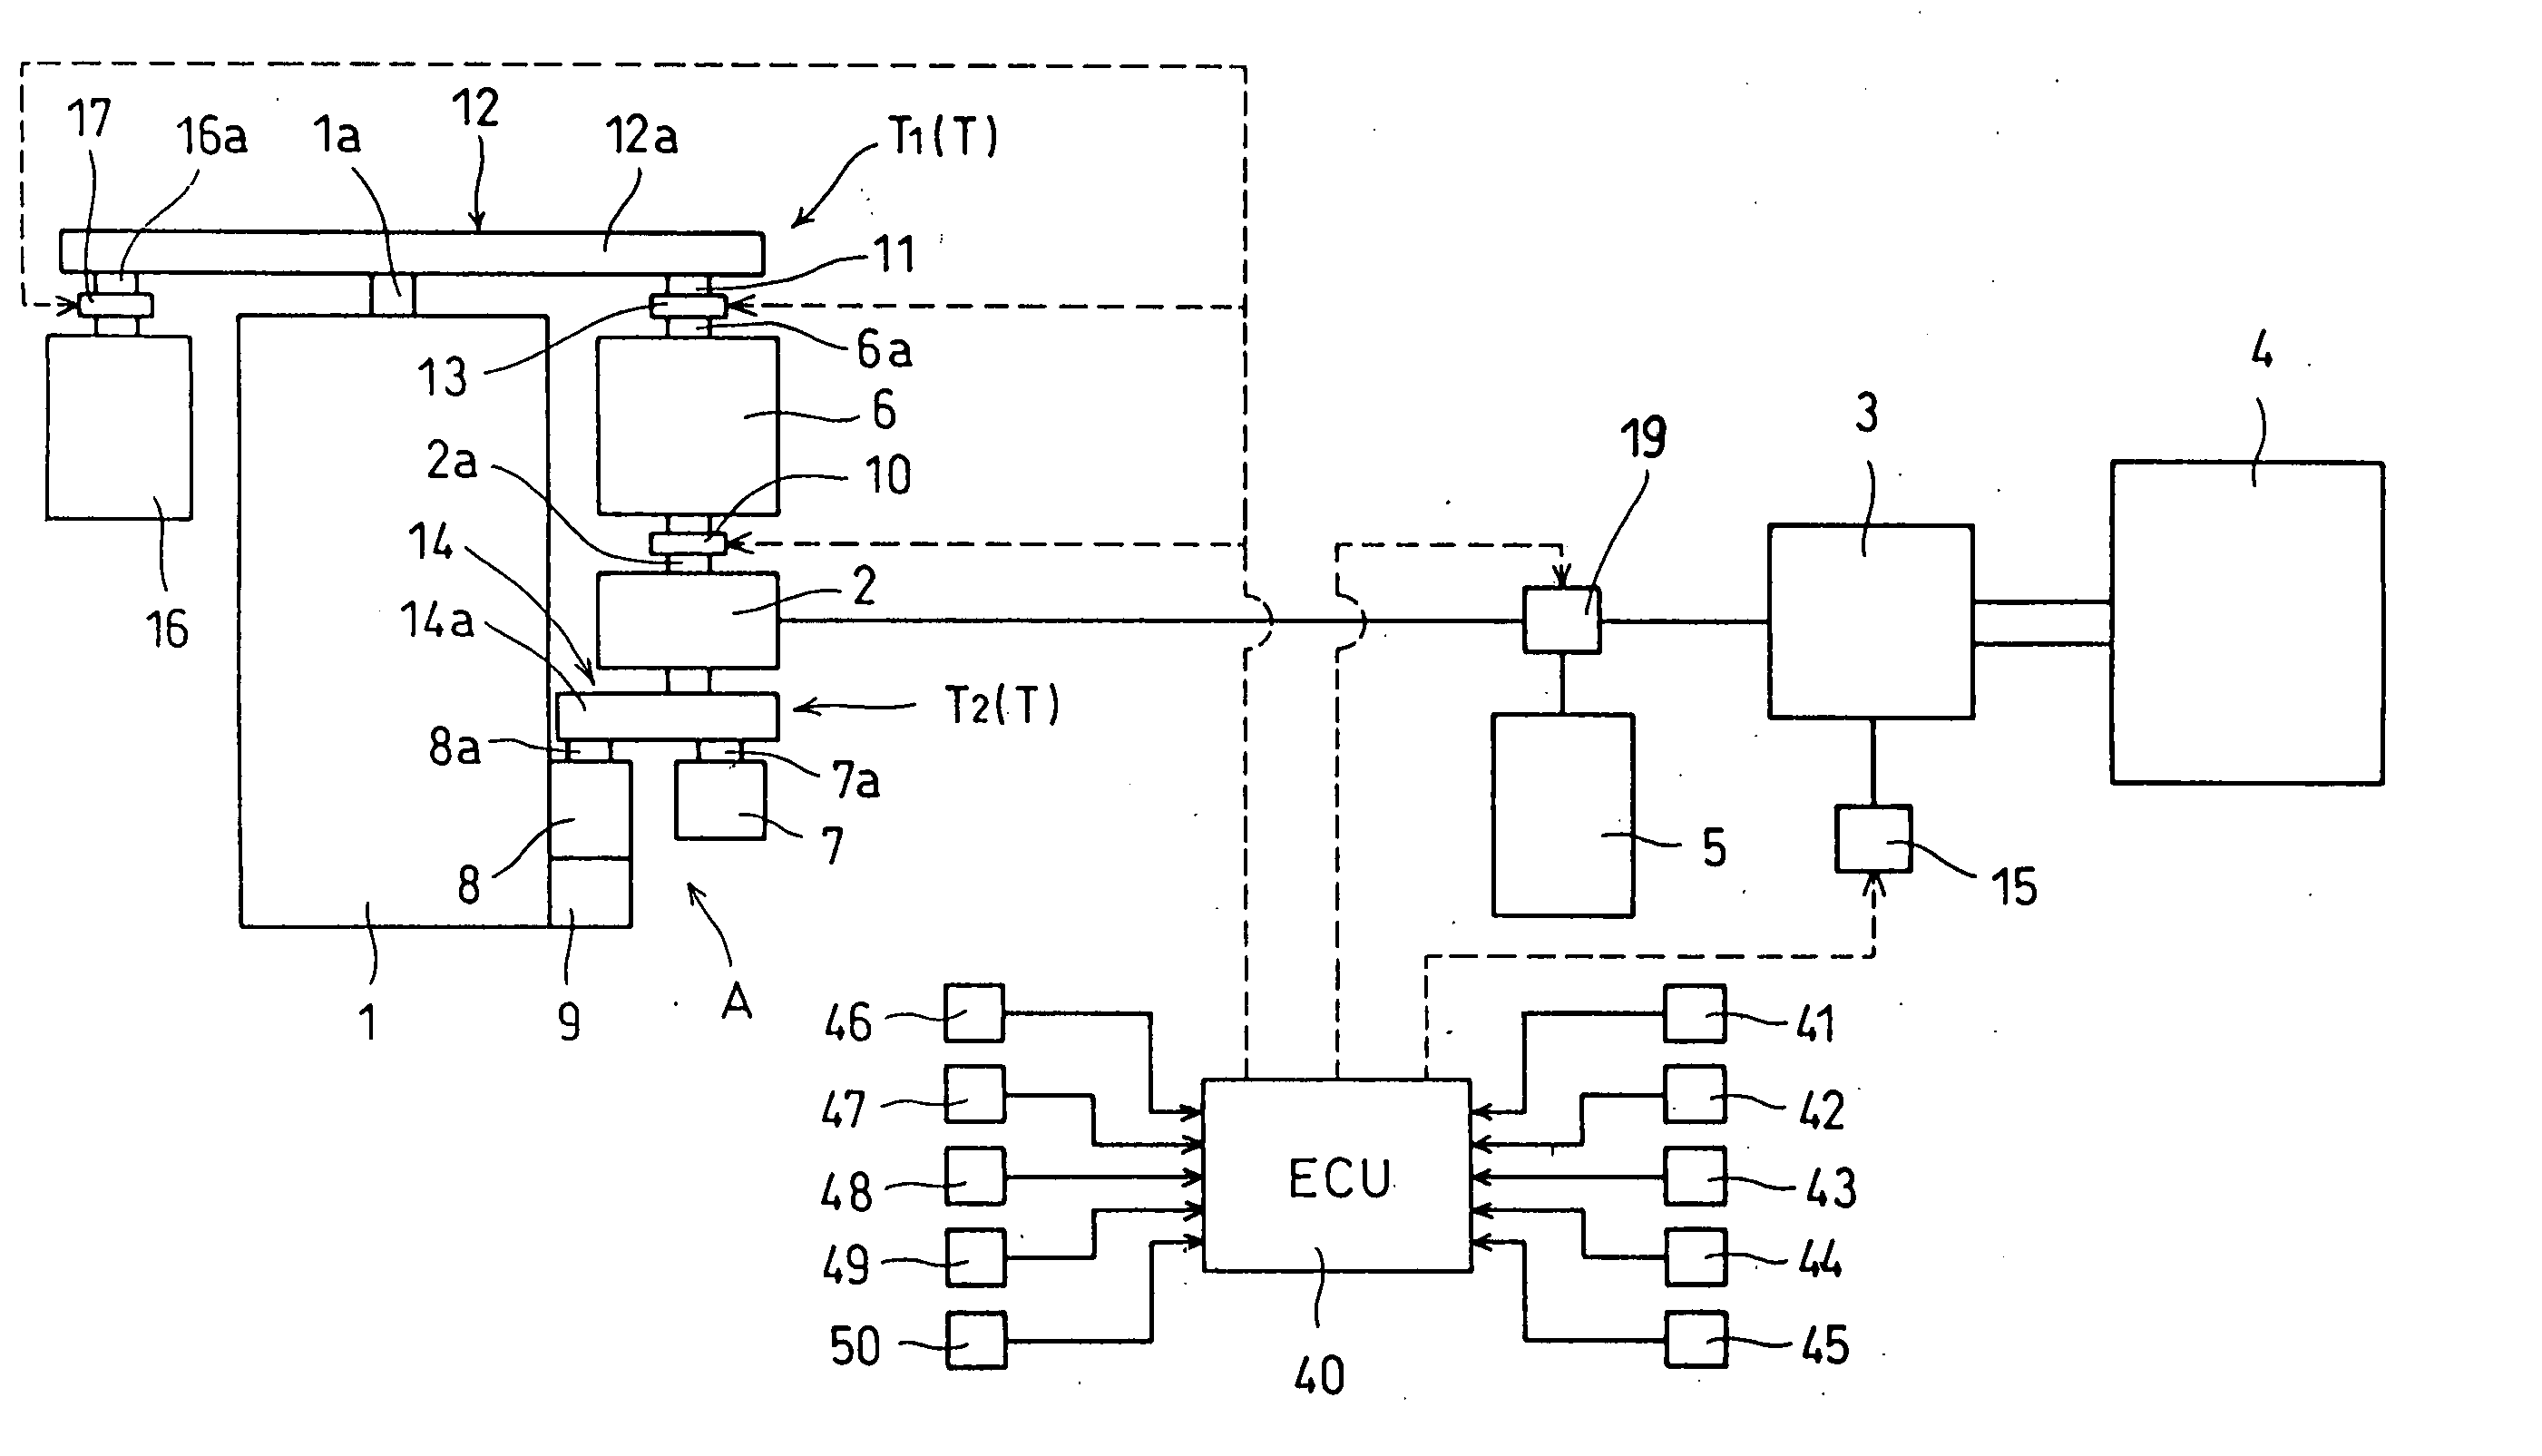 Power device equipped with combustion engine and stirling engine